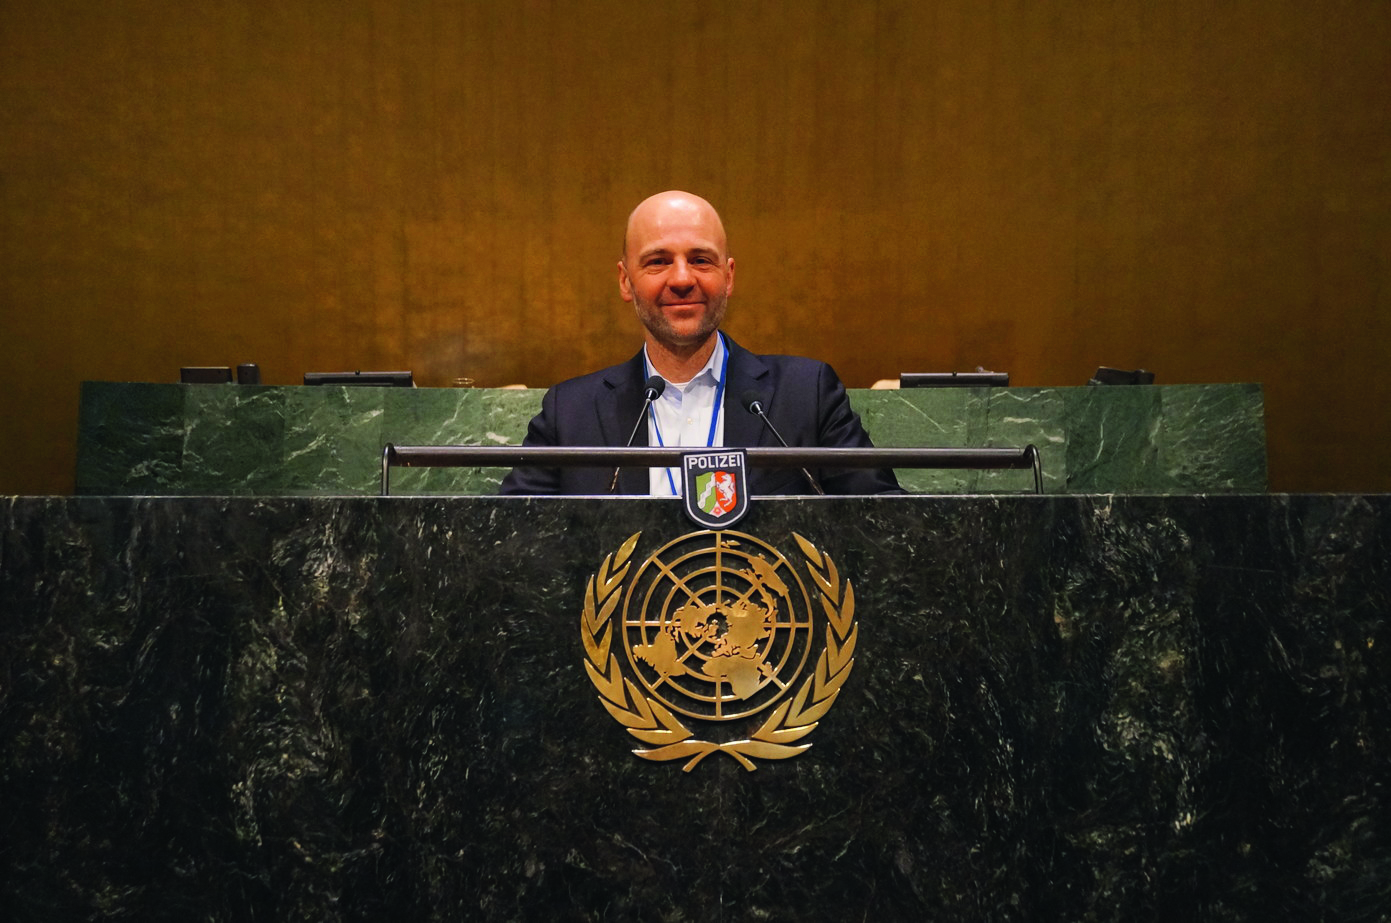 Stefan Schwarz at the lectern at the UN General Assembly